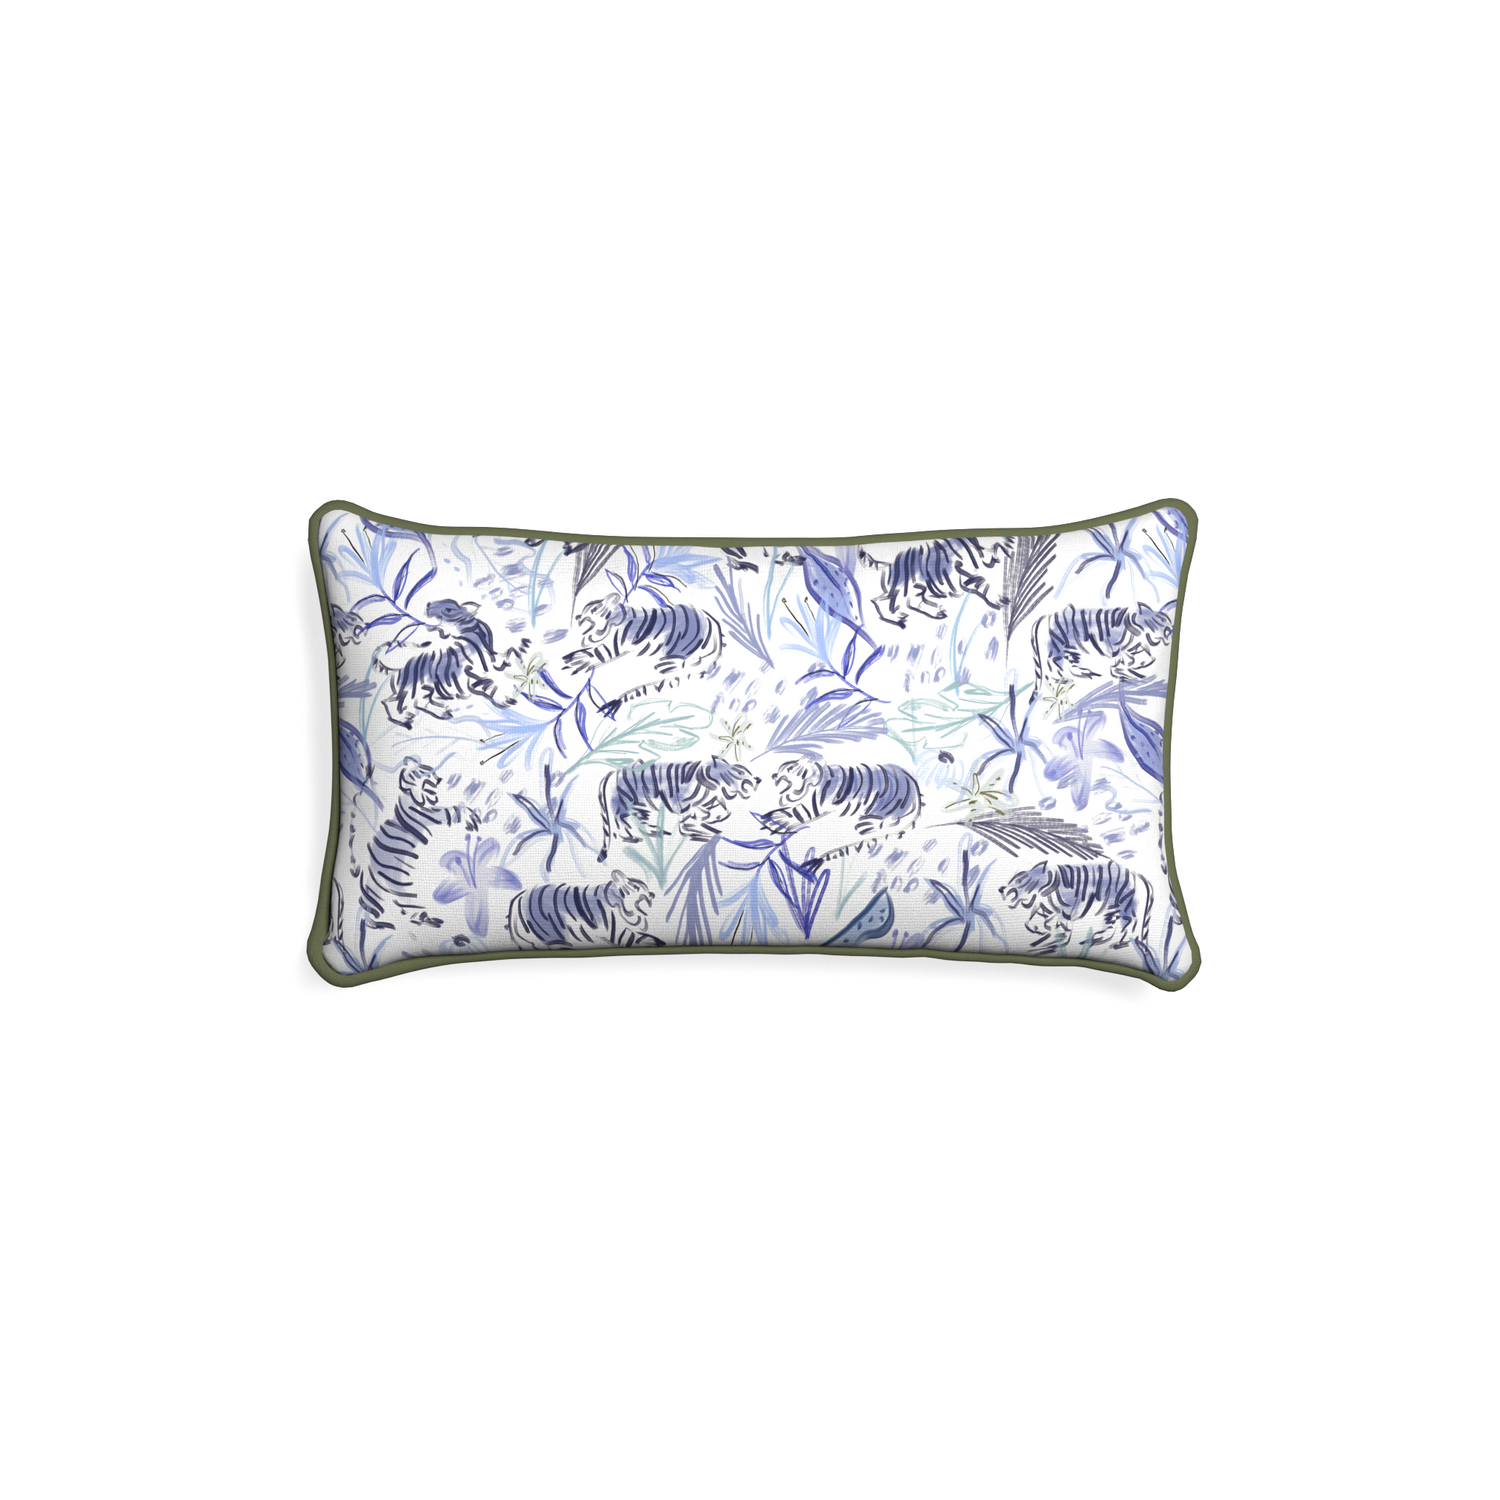 Petite-lumbar frida blue custom blue with intricate tiger designpillow with f piping on white background